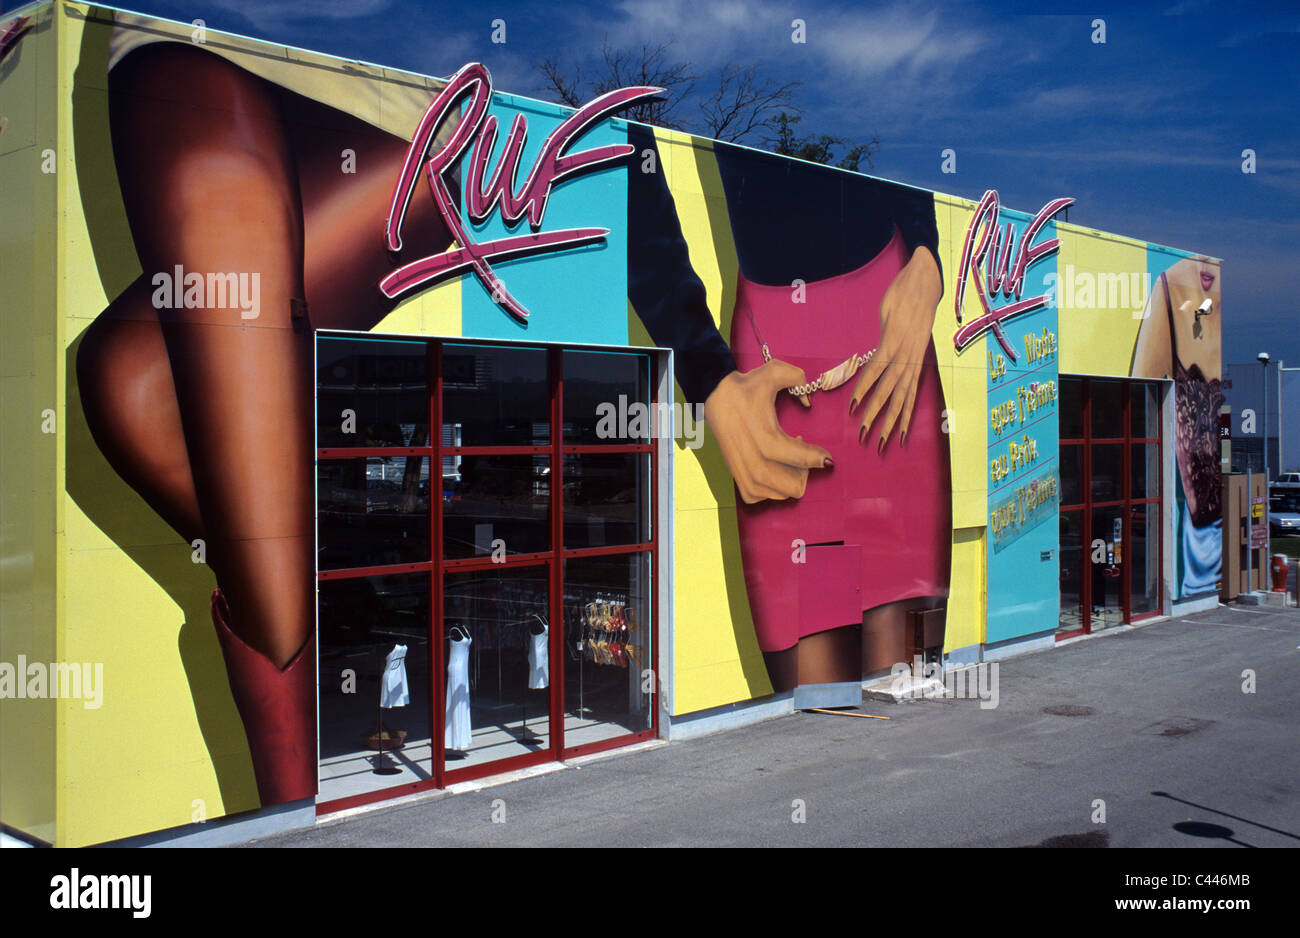 Women's Clothes Shop Front, 'Ruf', Out of Town Store Front Painted with Women's Legs & Mini Skirt, Mandelieu-la-Napoule, France Stock Photo